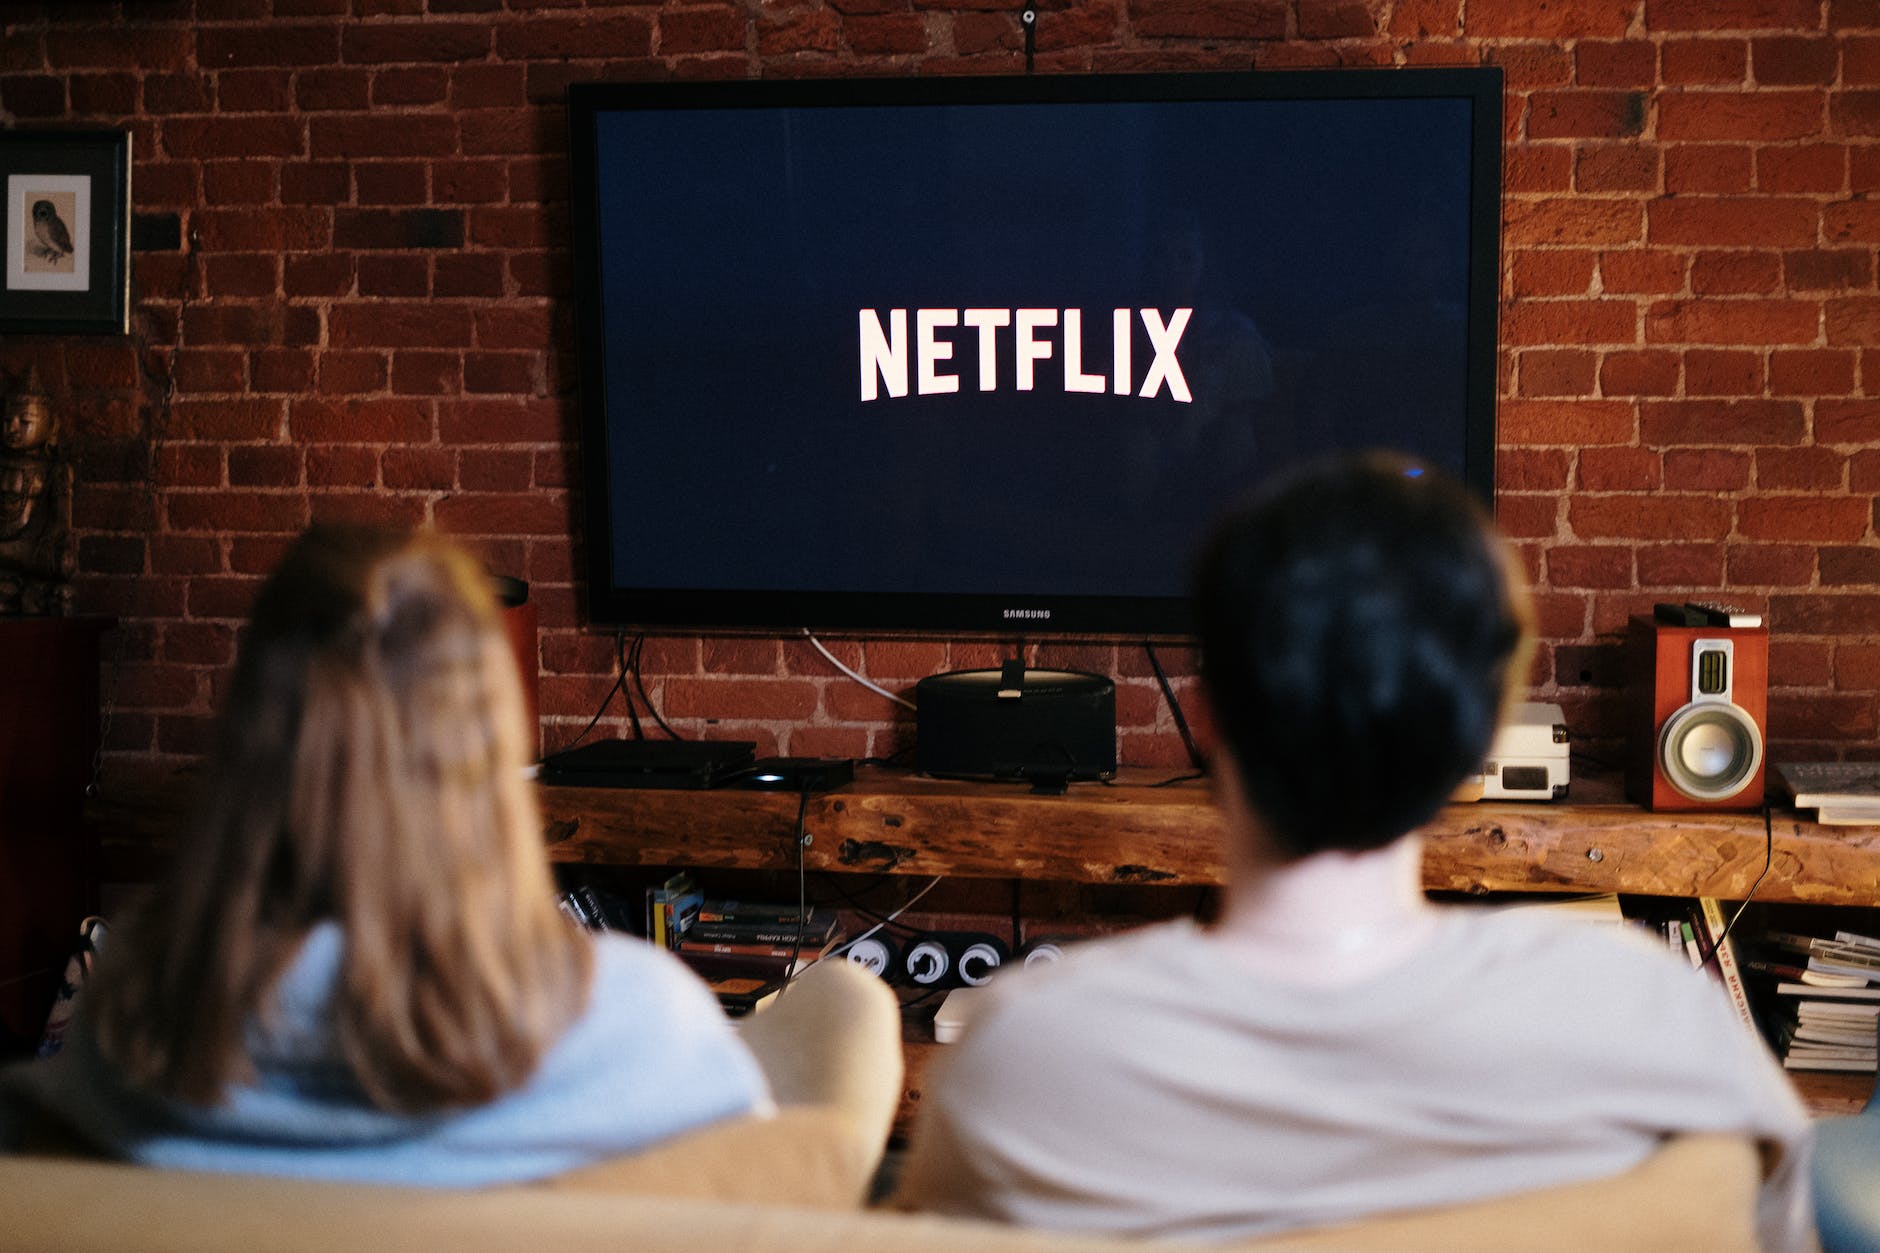 Are There Any Games on Netflix Worth Playing?